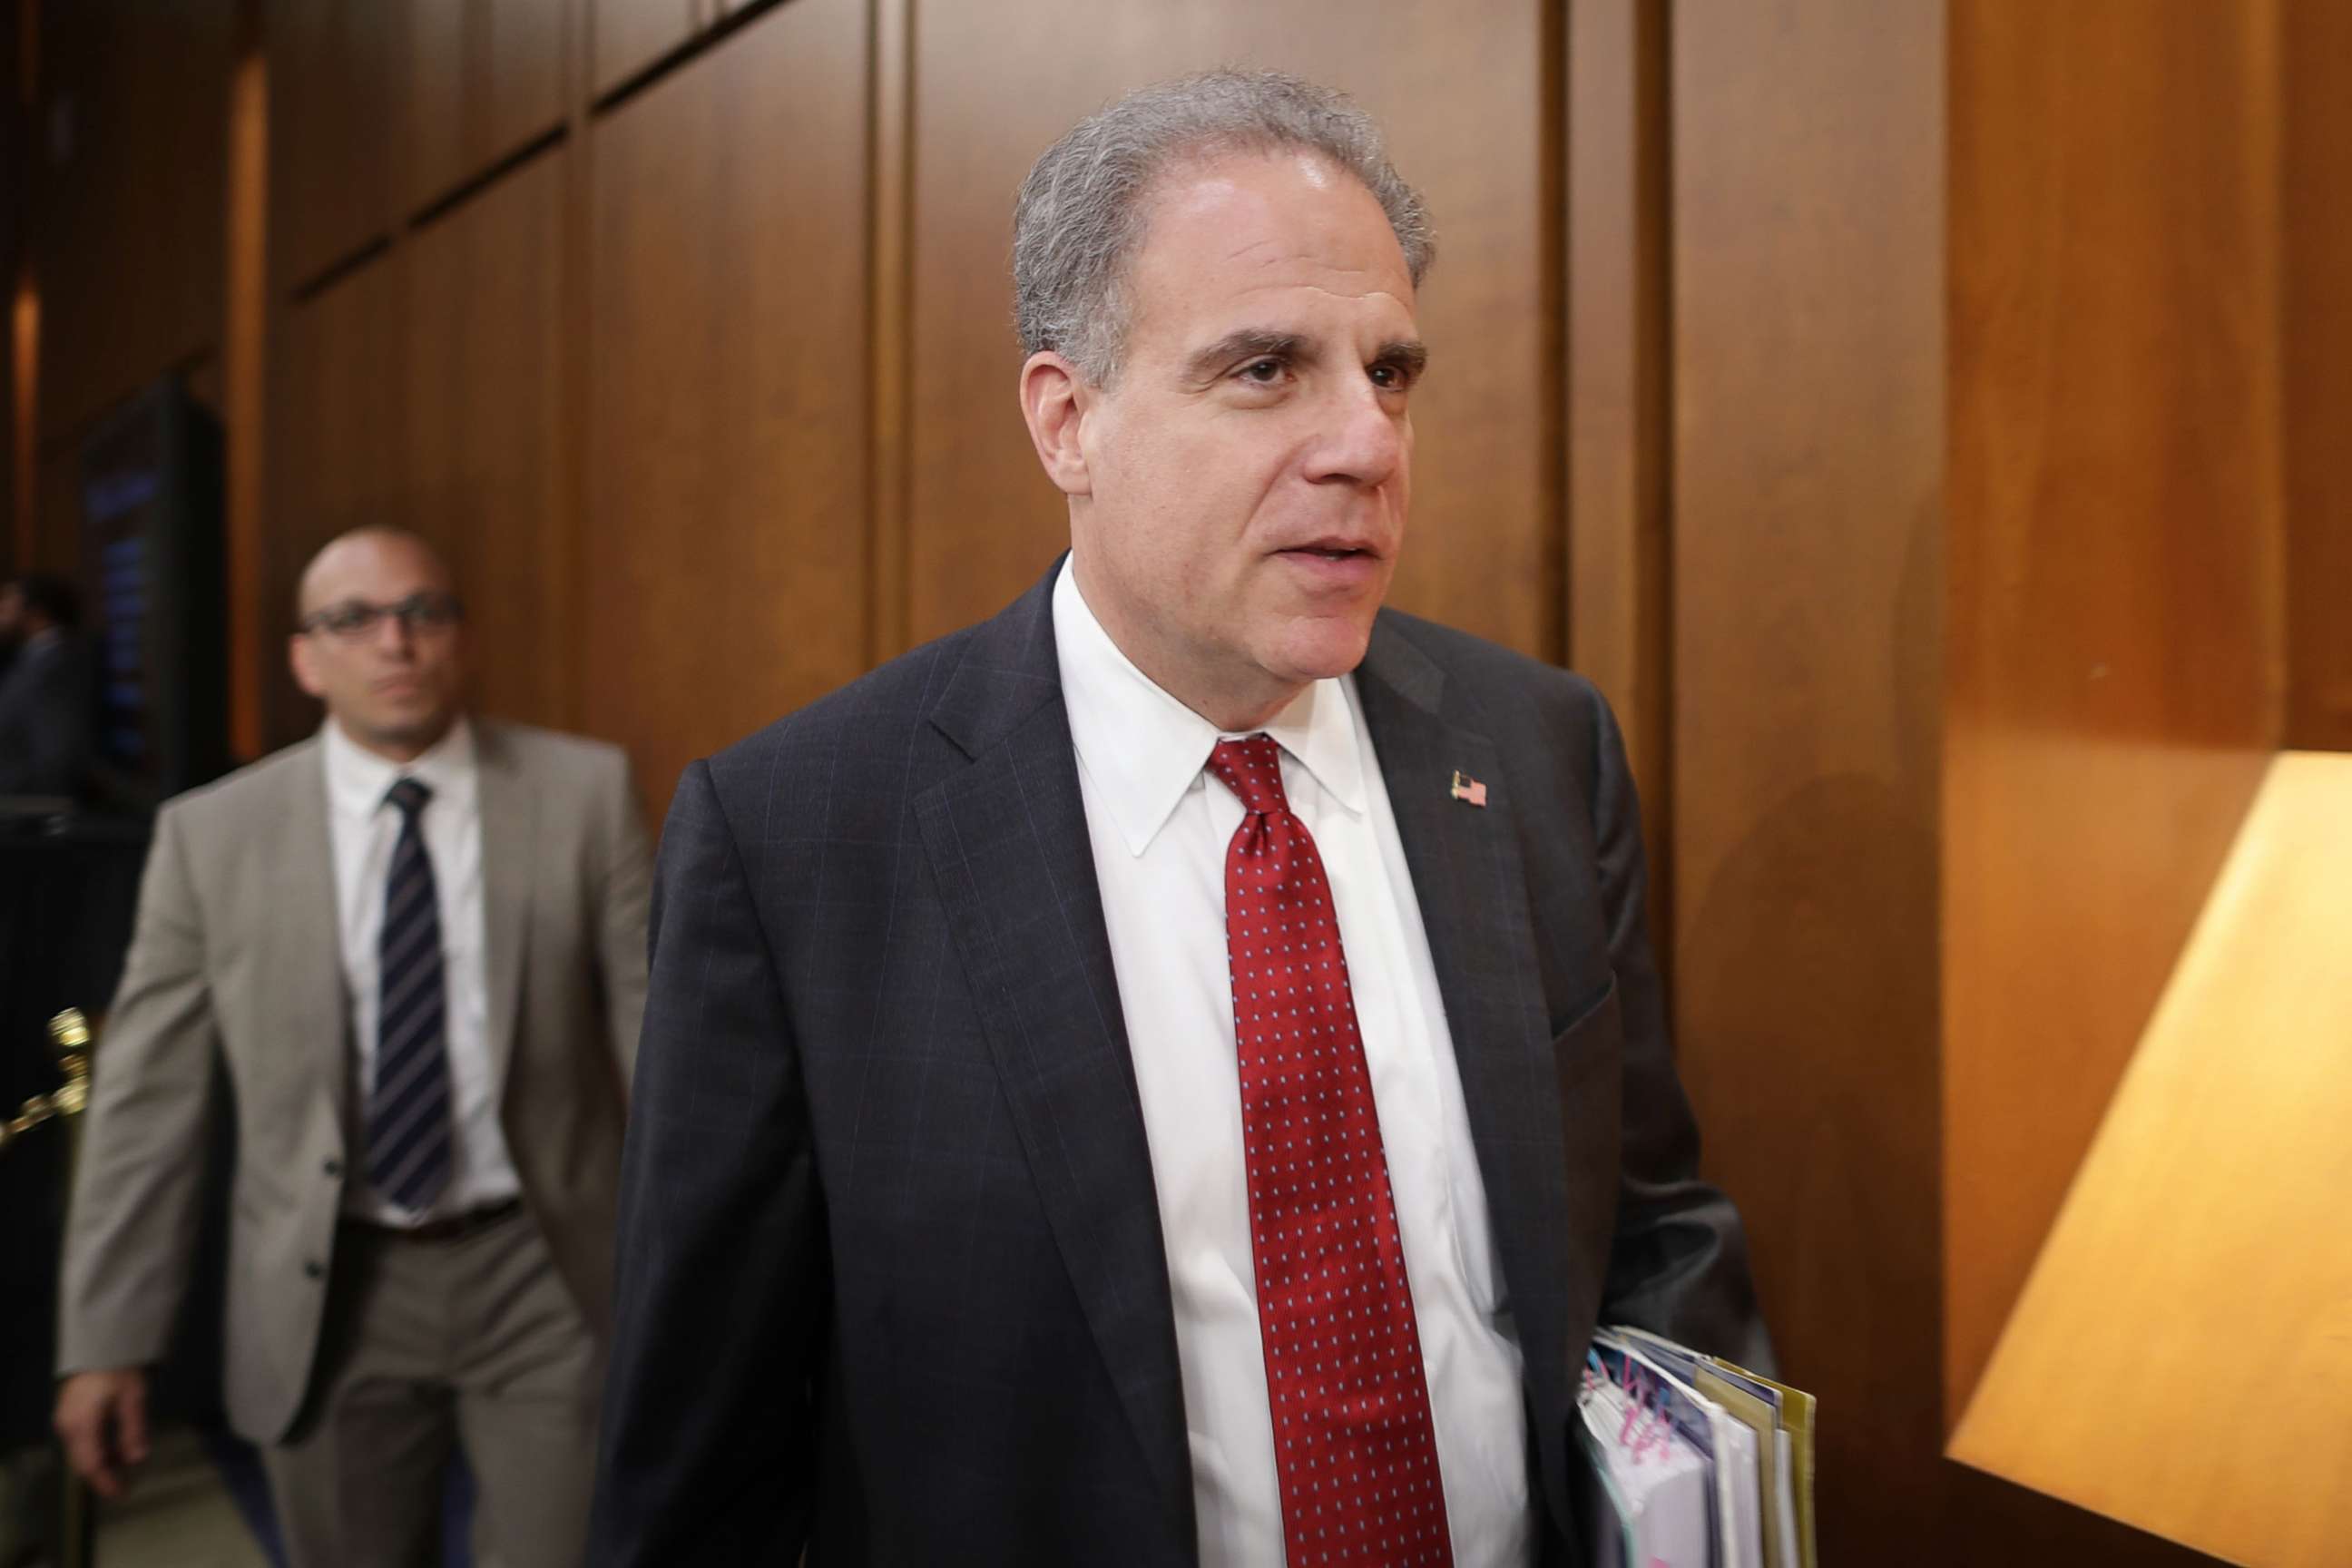 PHOTO: Justice Department Inspector General Michael Horowitz arrives before testifying to the Senate Judiciary Committee in the Hart Senate Office Building on Capitol Hill June 18, 2018, in Washington, D.C.